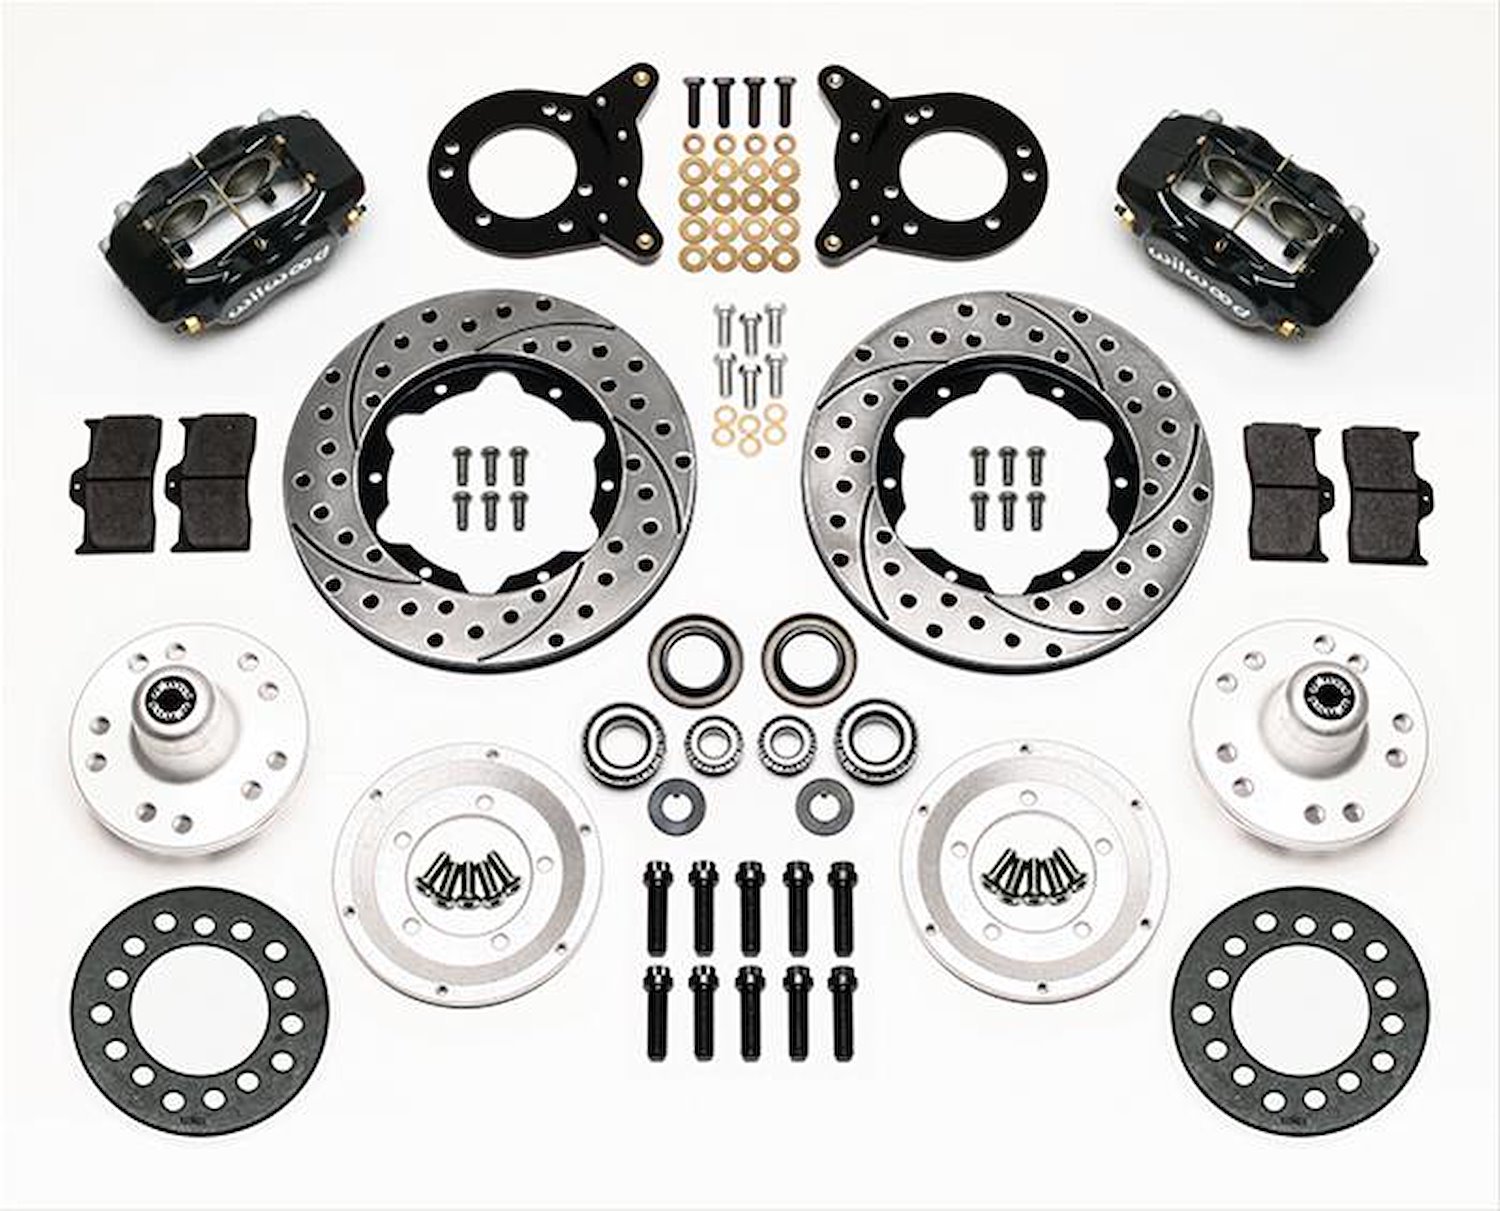 Forged Dynalite Pro Series Front Hub Kit 1970-1974 Ford Vehicles